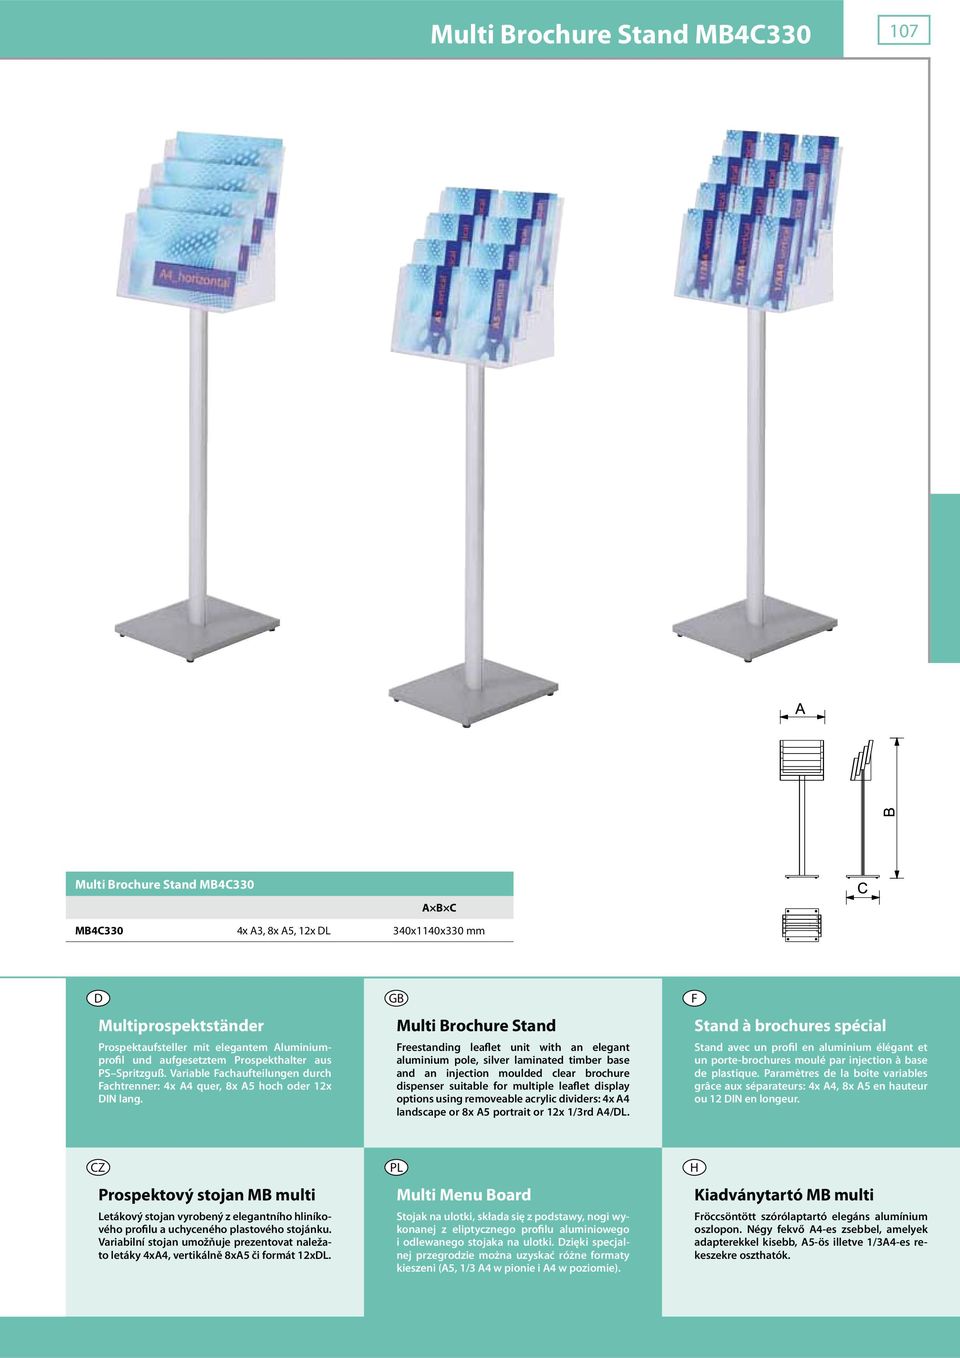 Multi Brochure Stand reestanding leaflet unit with an elegant aluminium pole, silver laminated timber base and an injection moulded clear brochure dispenser suitable for multiple leaflet display